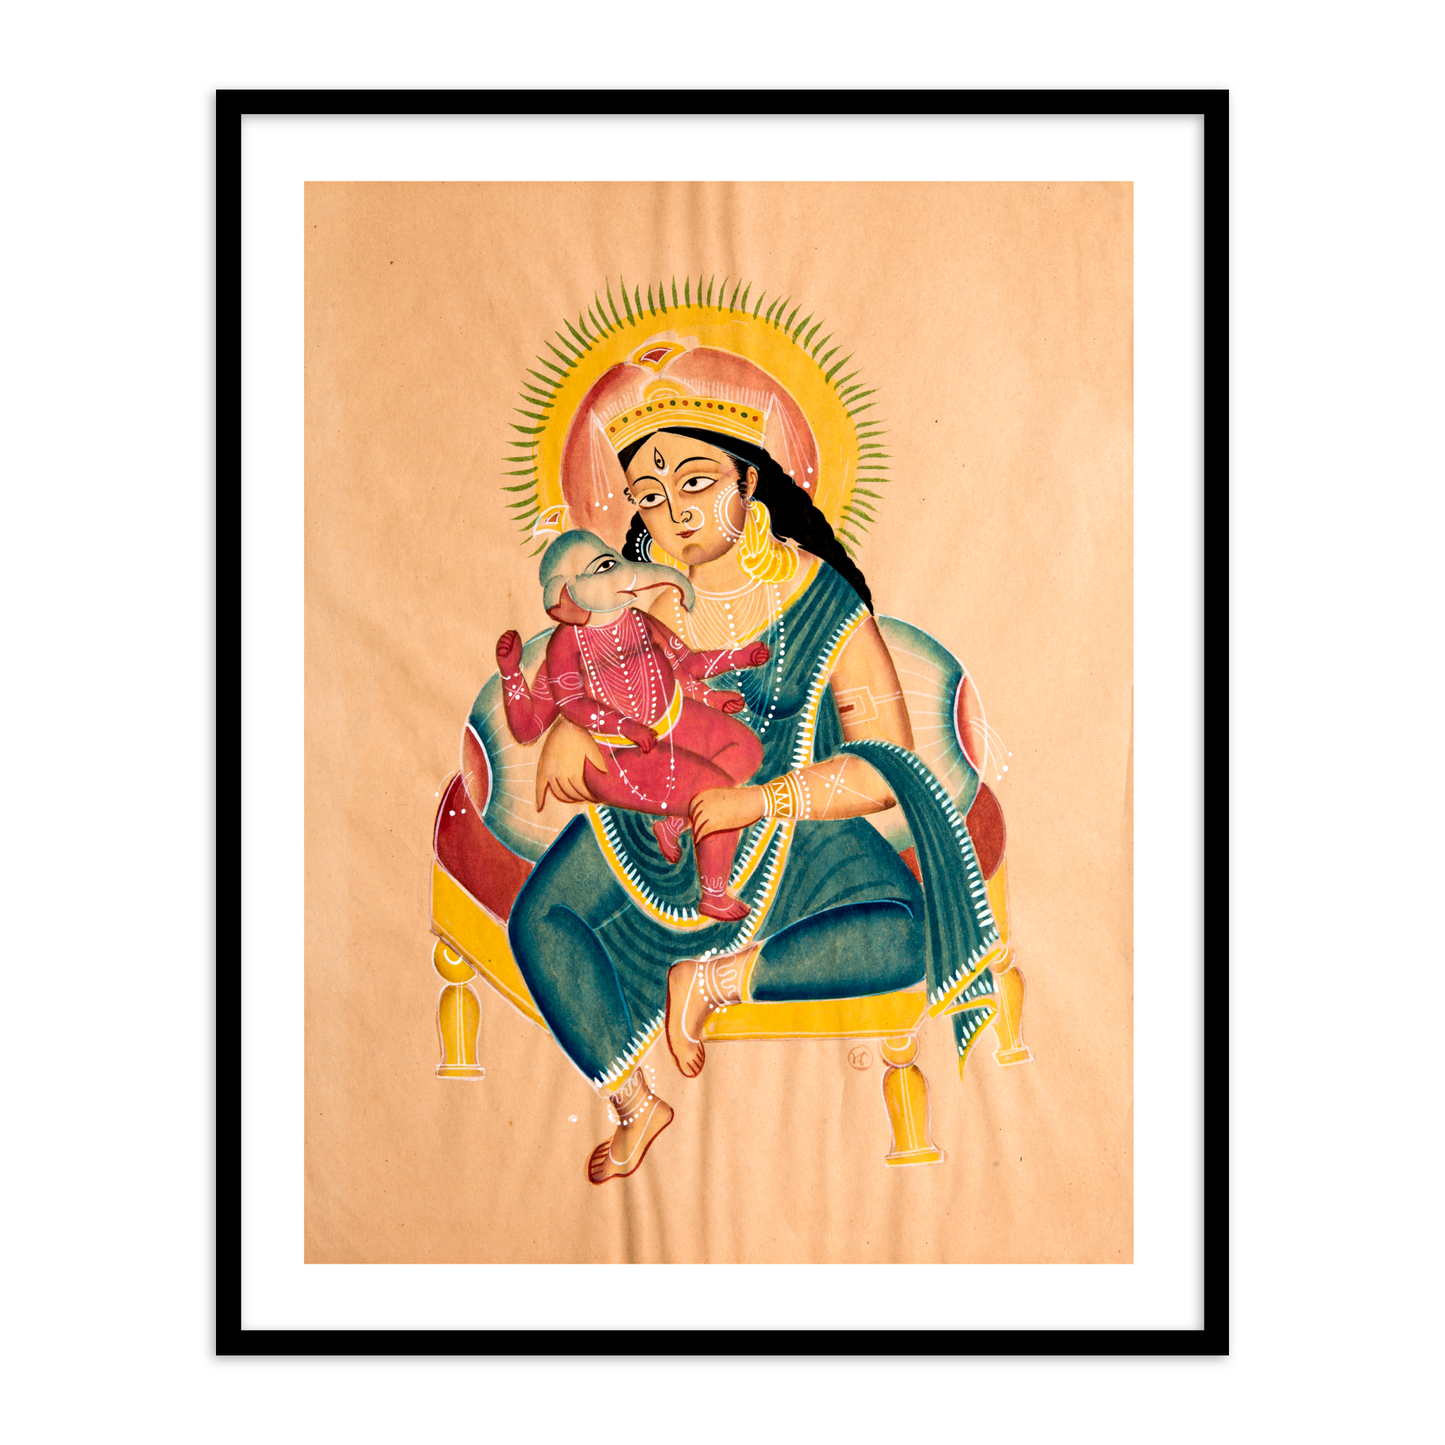 Parvati and Ganesh Kalighat Painting Framed Wall Art for Decor